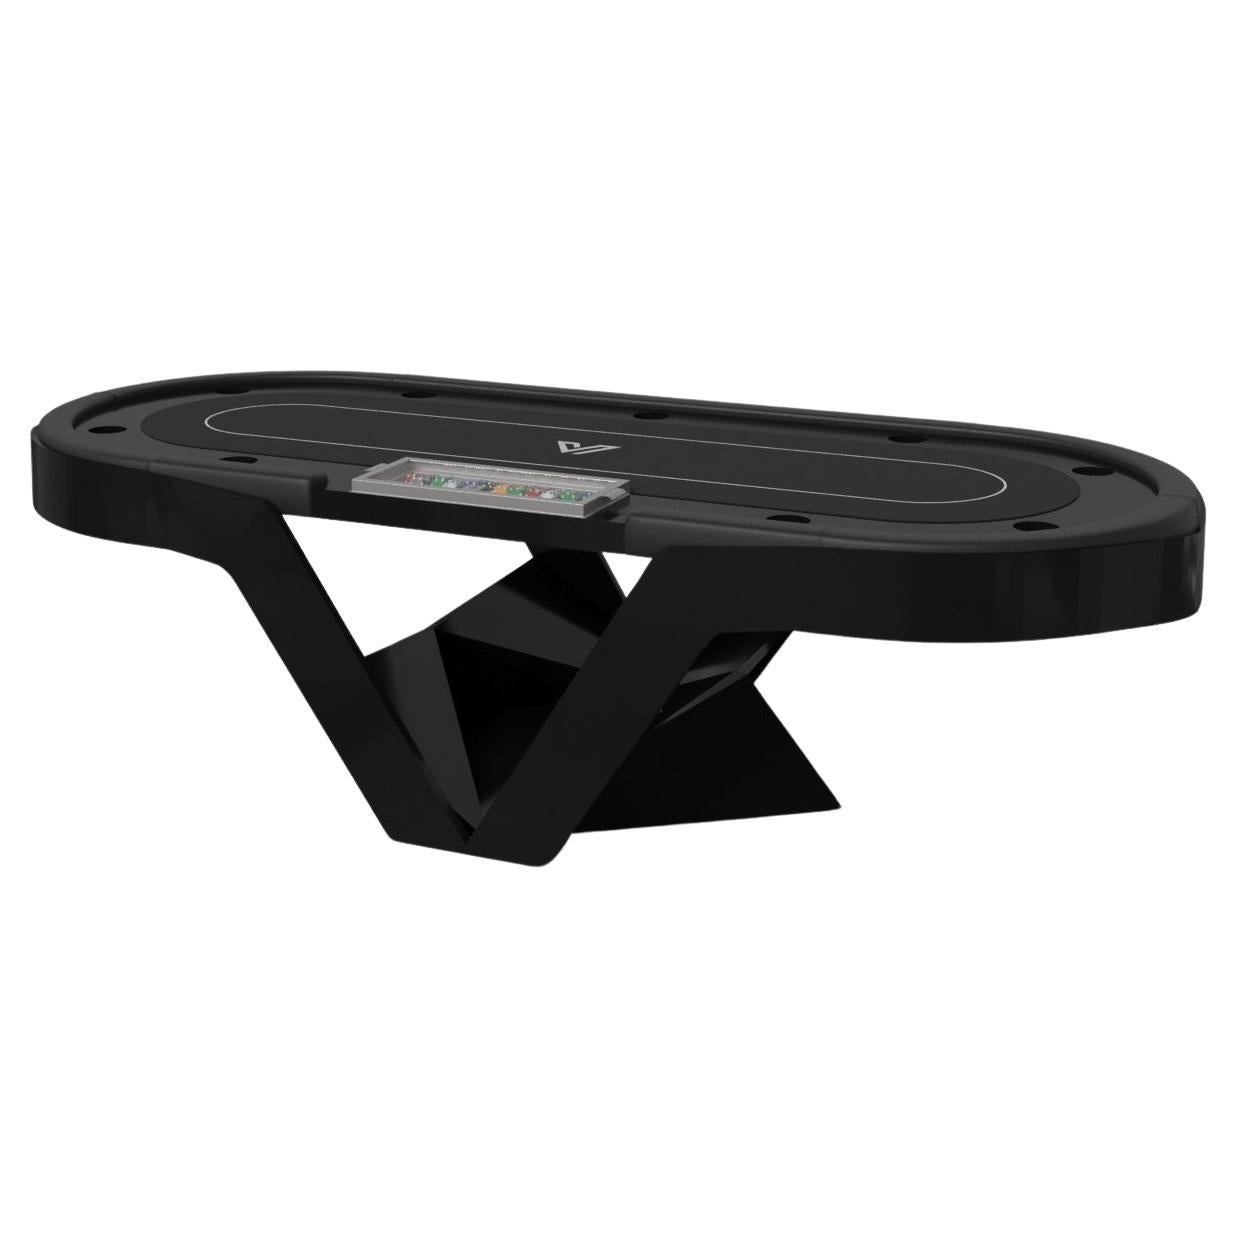 Elevate Customs Enzo Poker Tables / Solid Pantone Black Color in 8'8" - USA